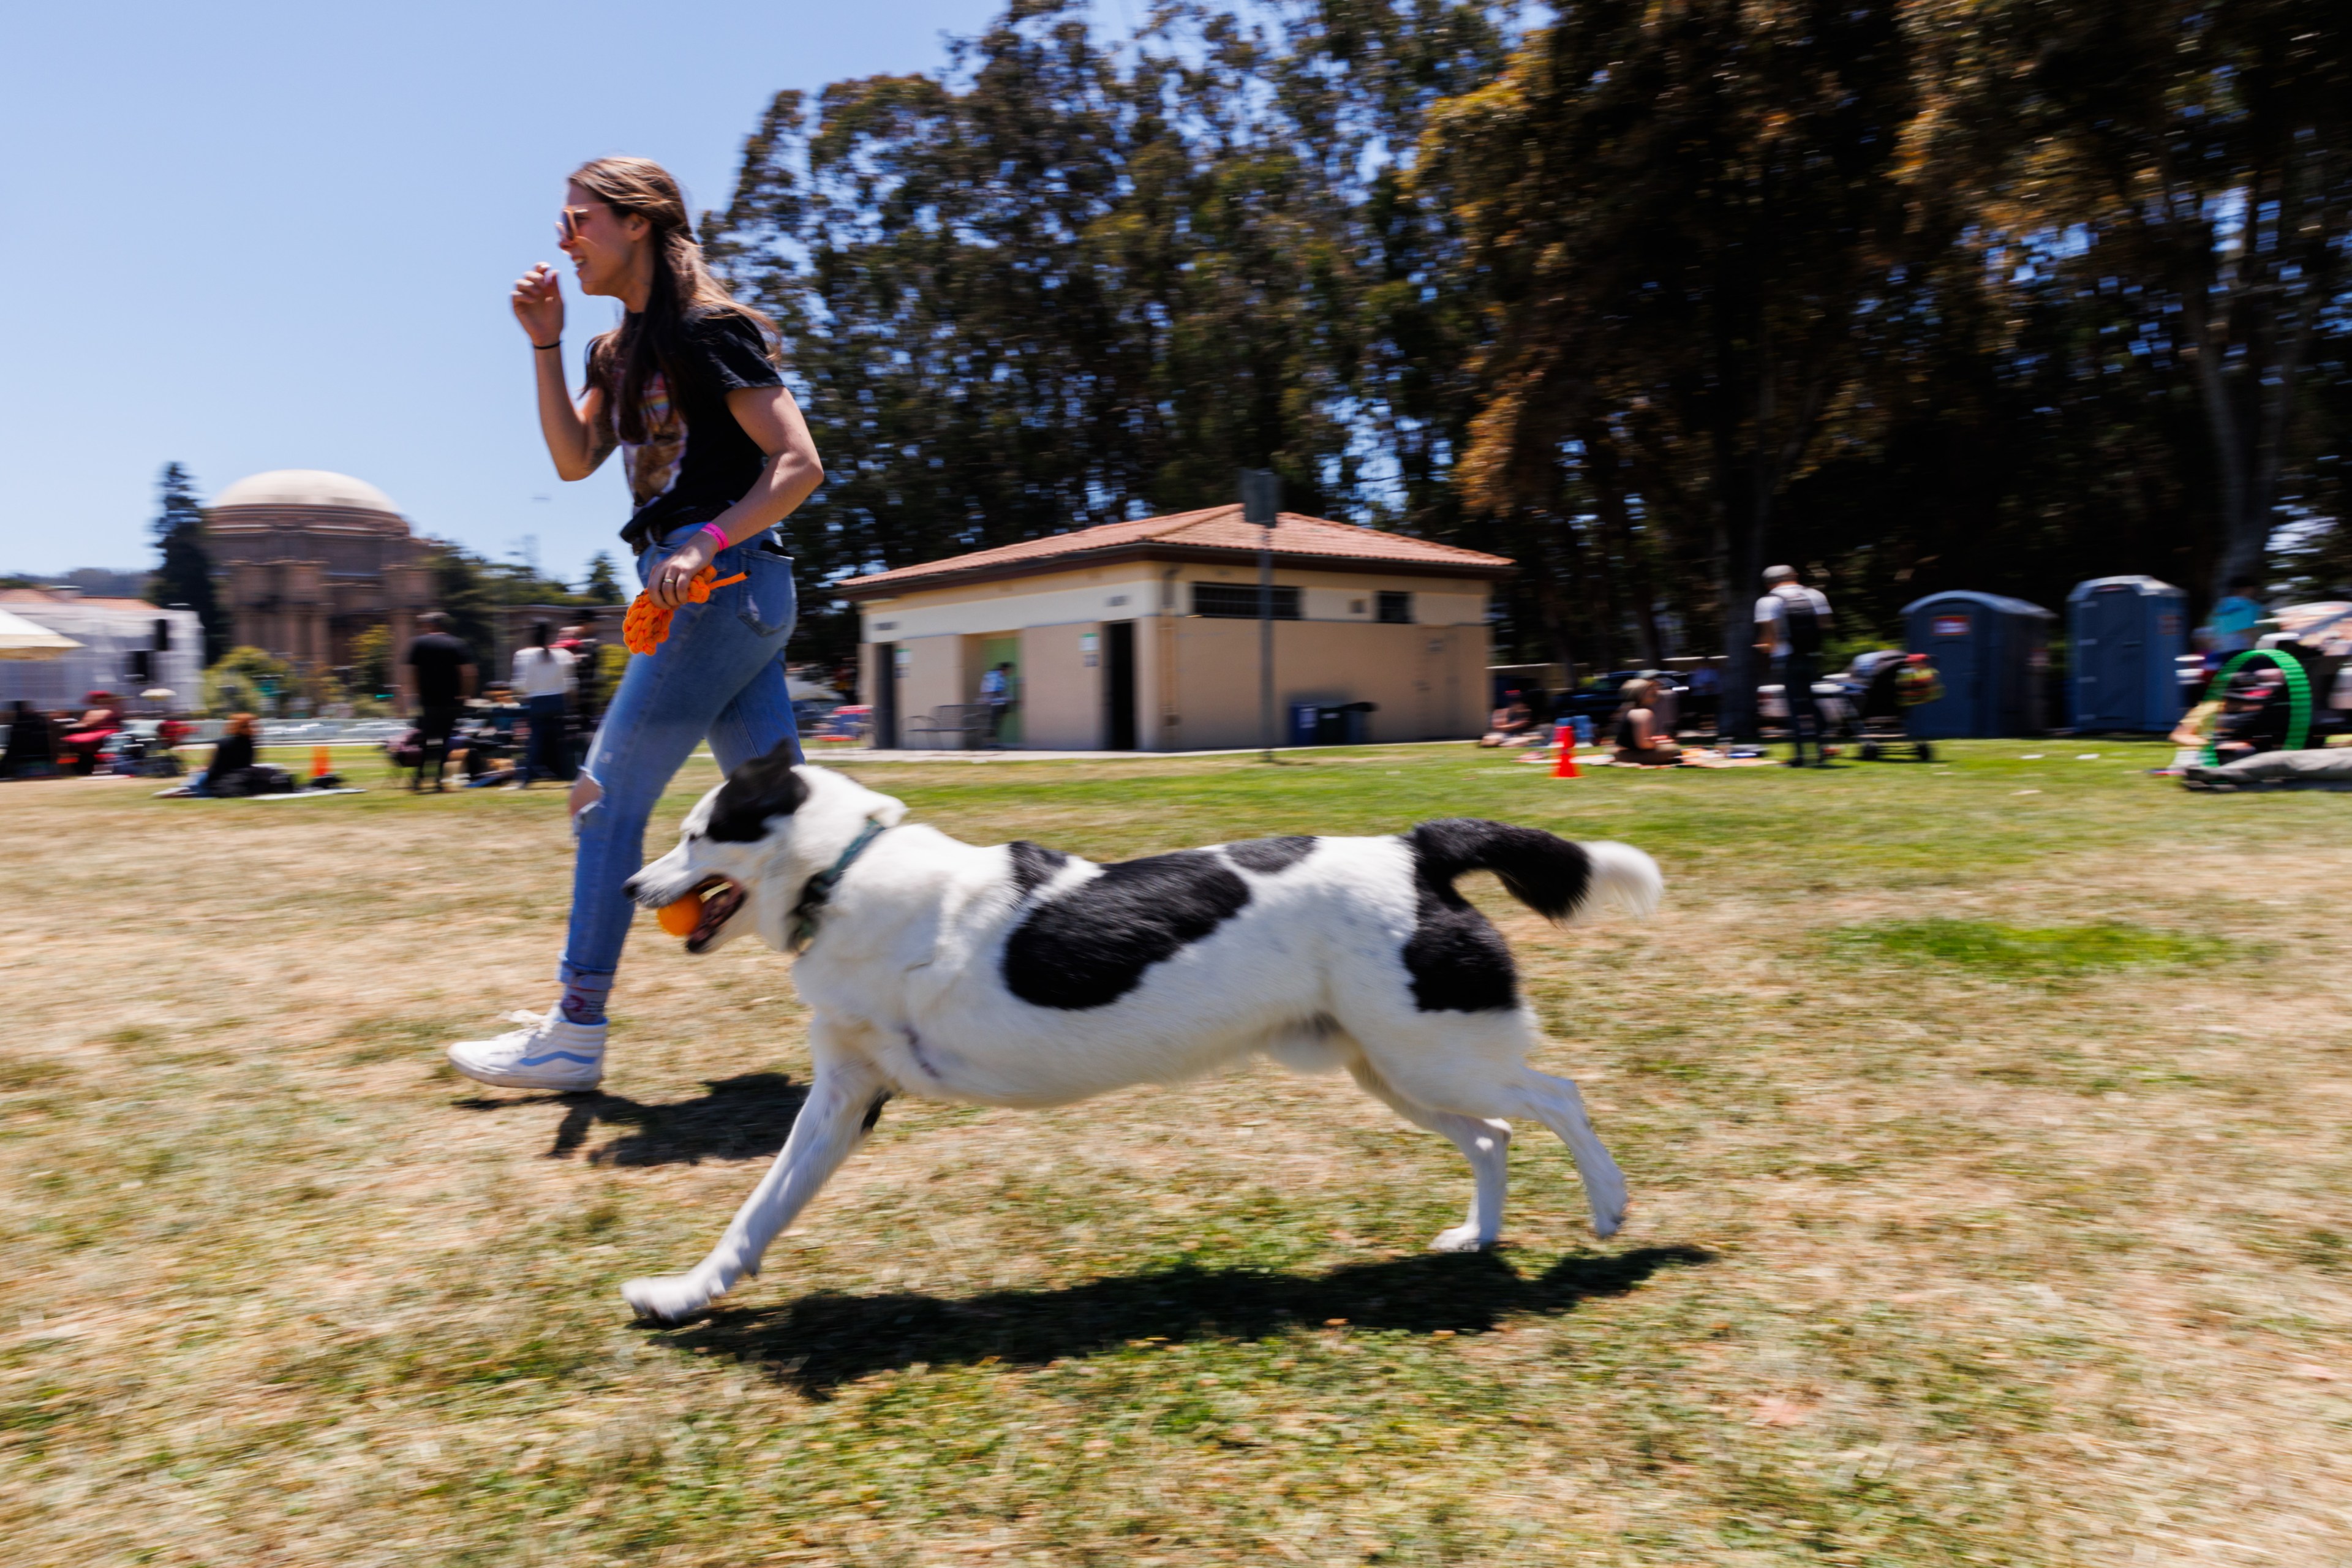 A woman in casual clothes walks along a park while a black and white dog runs beside her, holding an orange ball. People are relaxing in the background.